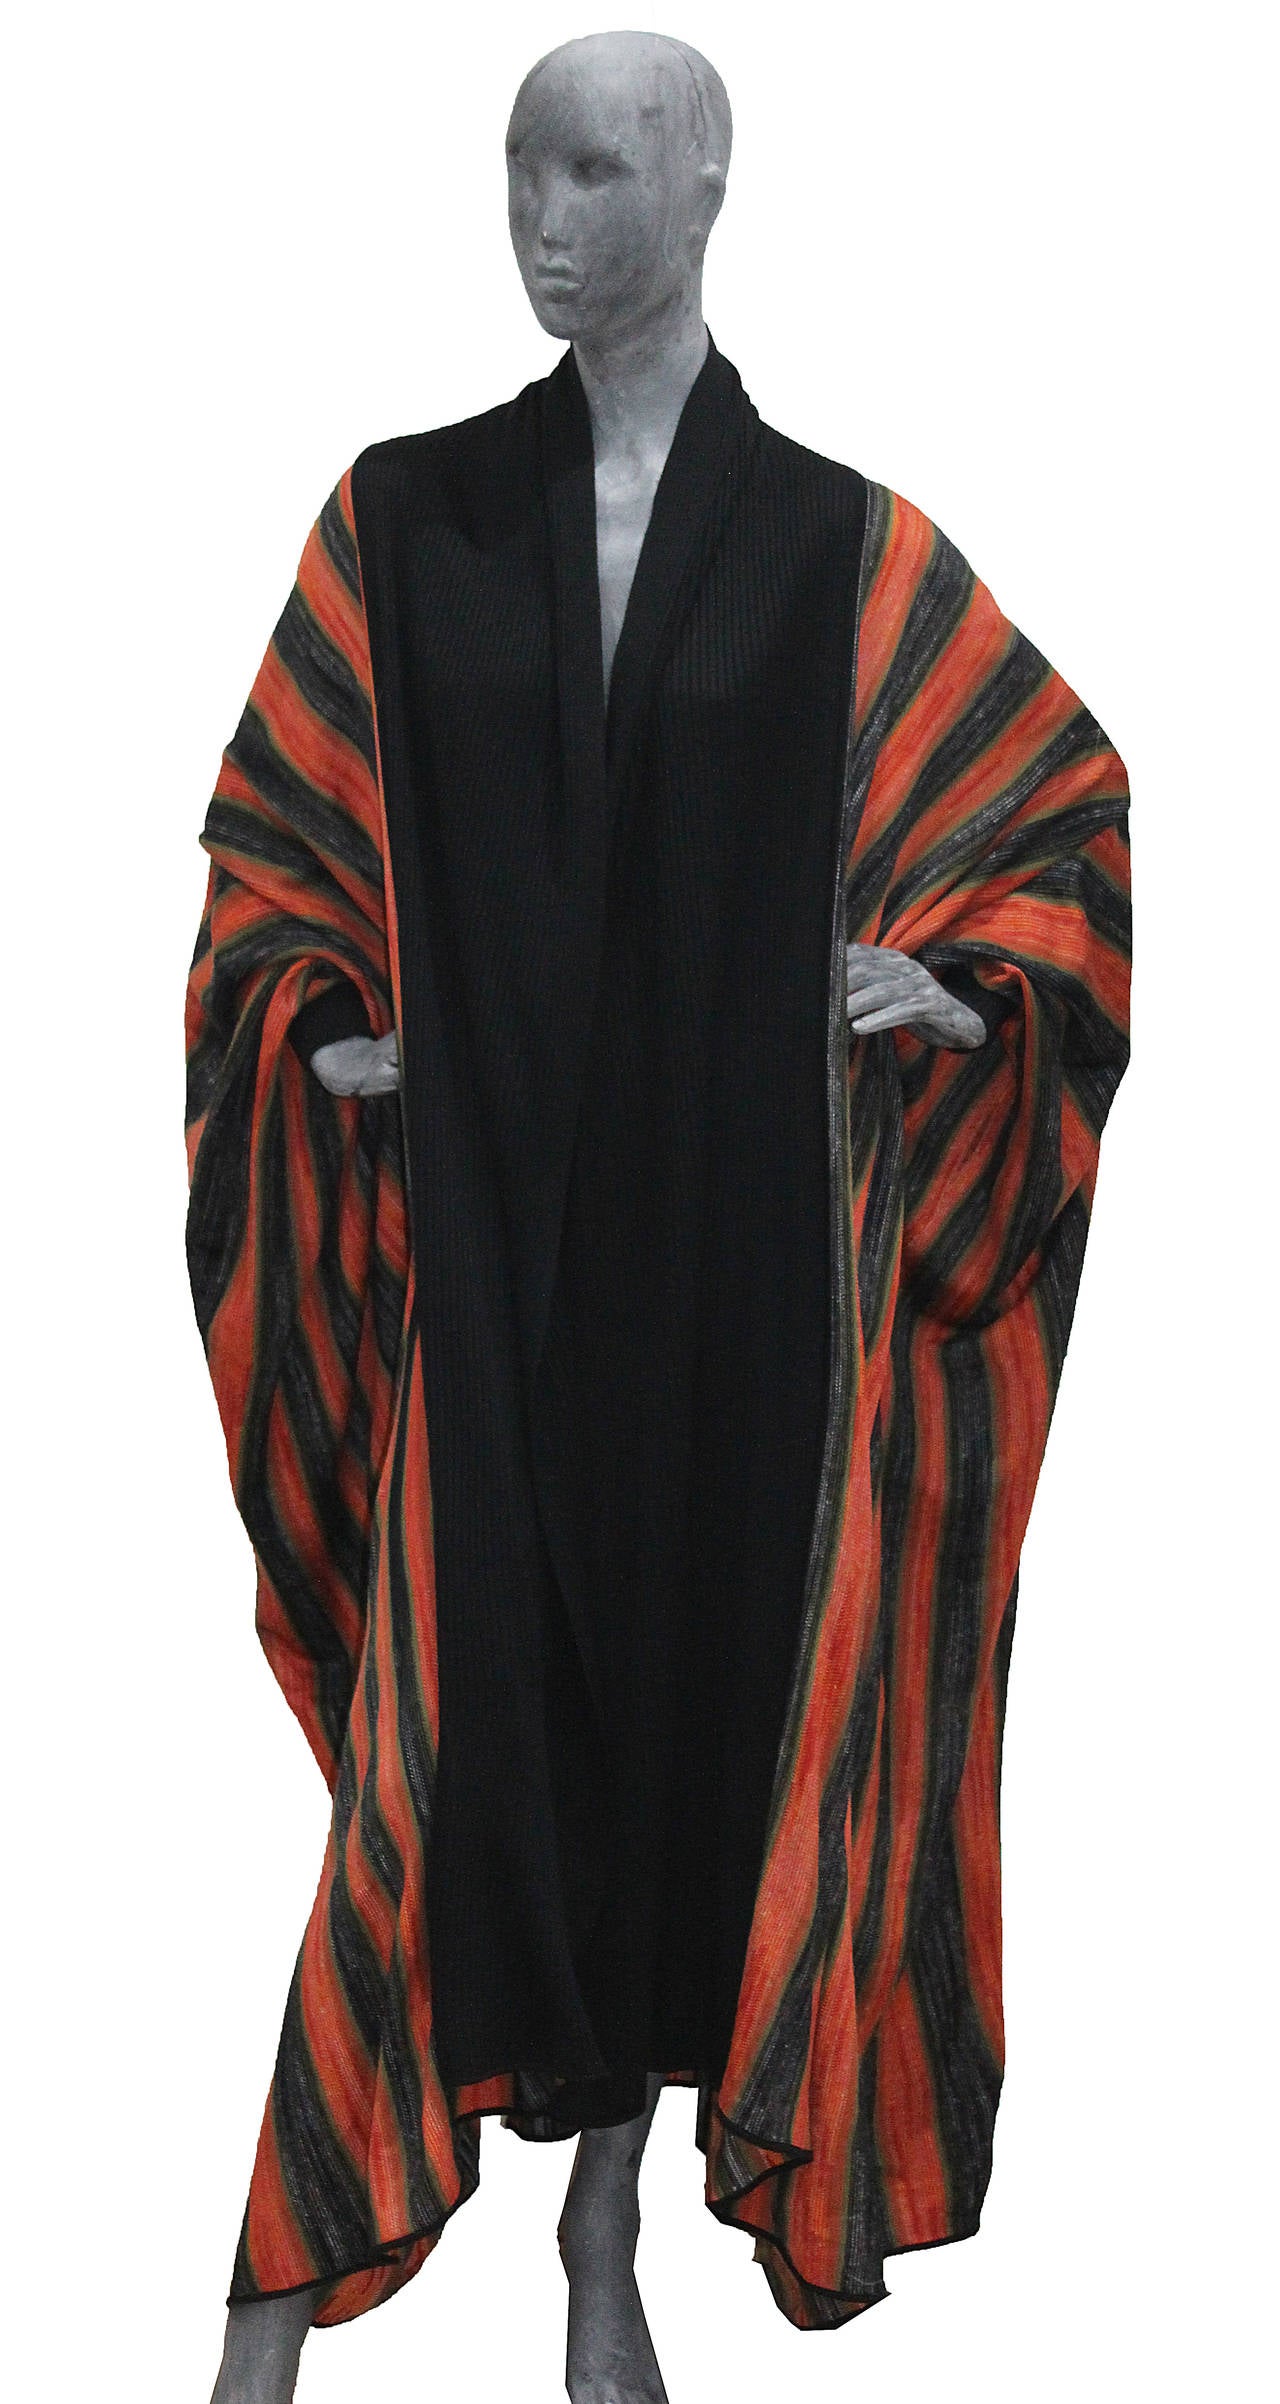 A rare 1970s striped knit cloak by Issey Miyake. The robe features huge batwing sleeves and a rib knit collar and cuff. Reference image found in the official Issey Miyake book. 

Size Medium